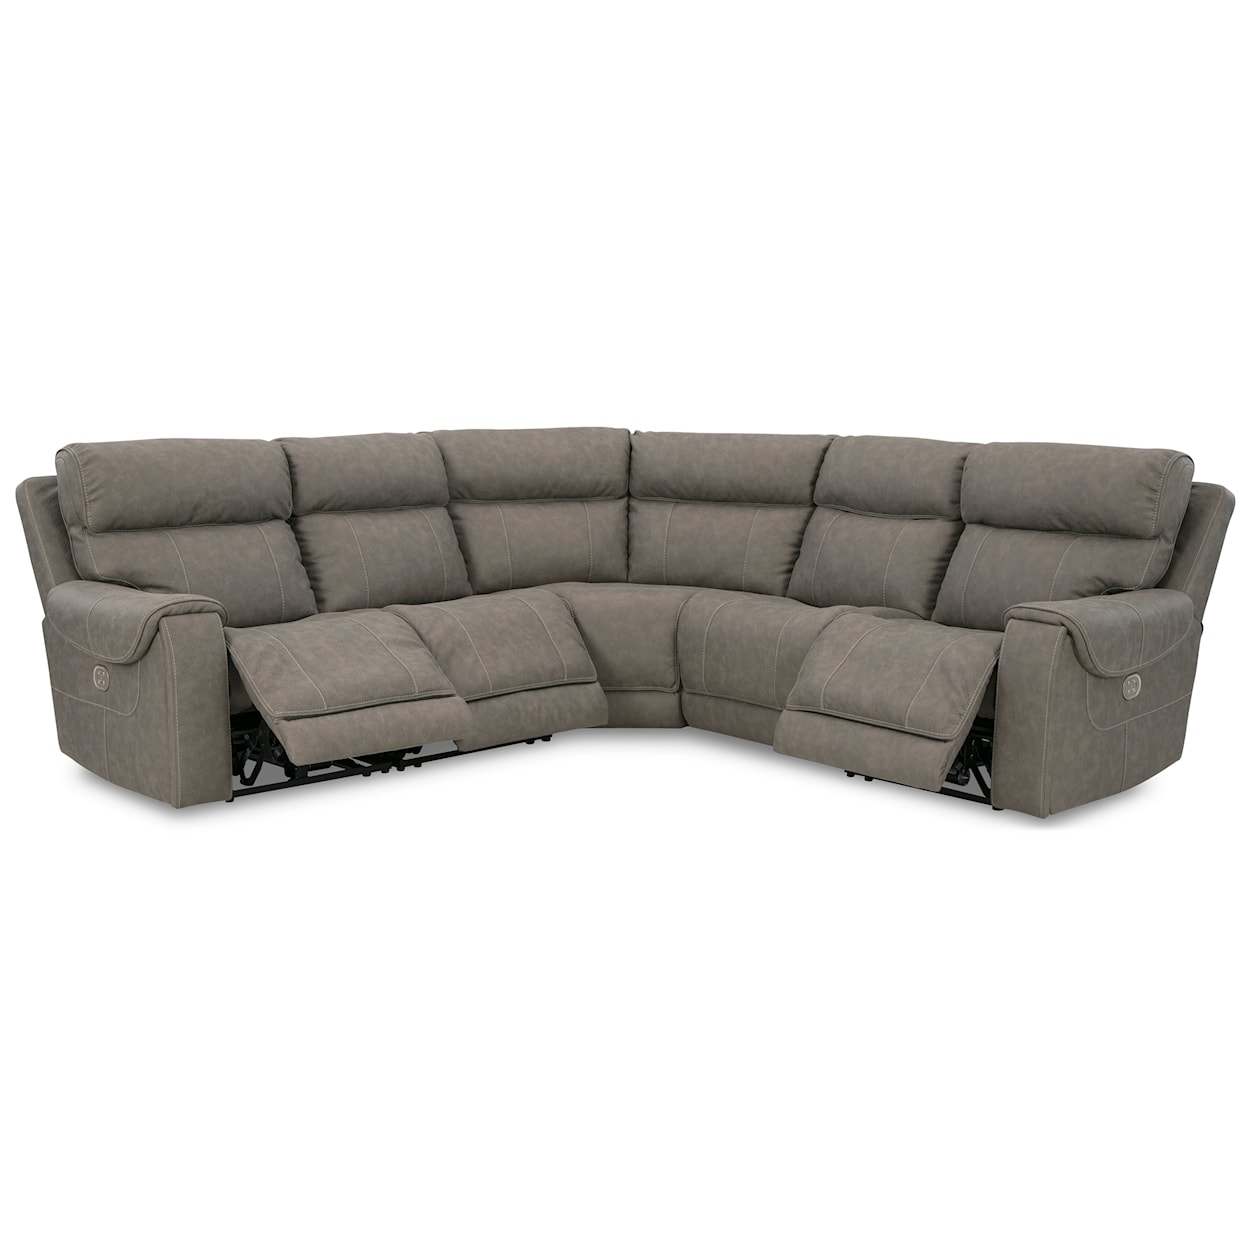 Ashley Signature Design Starbot 5-Piece Power Reclining Sectional